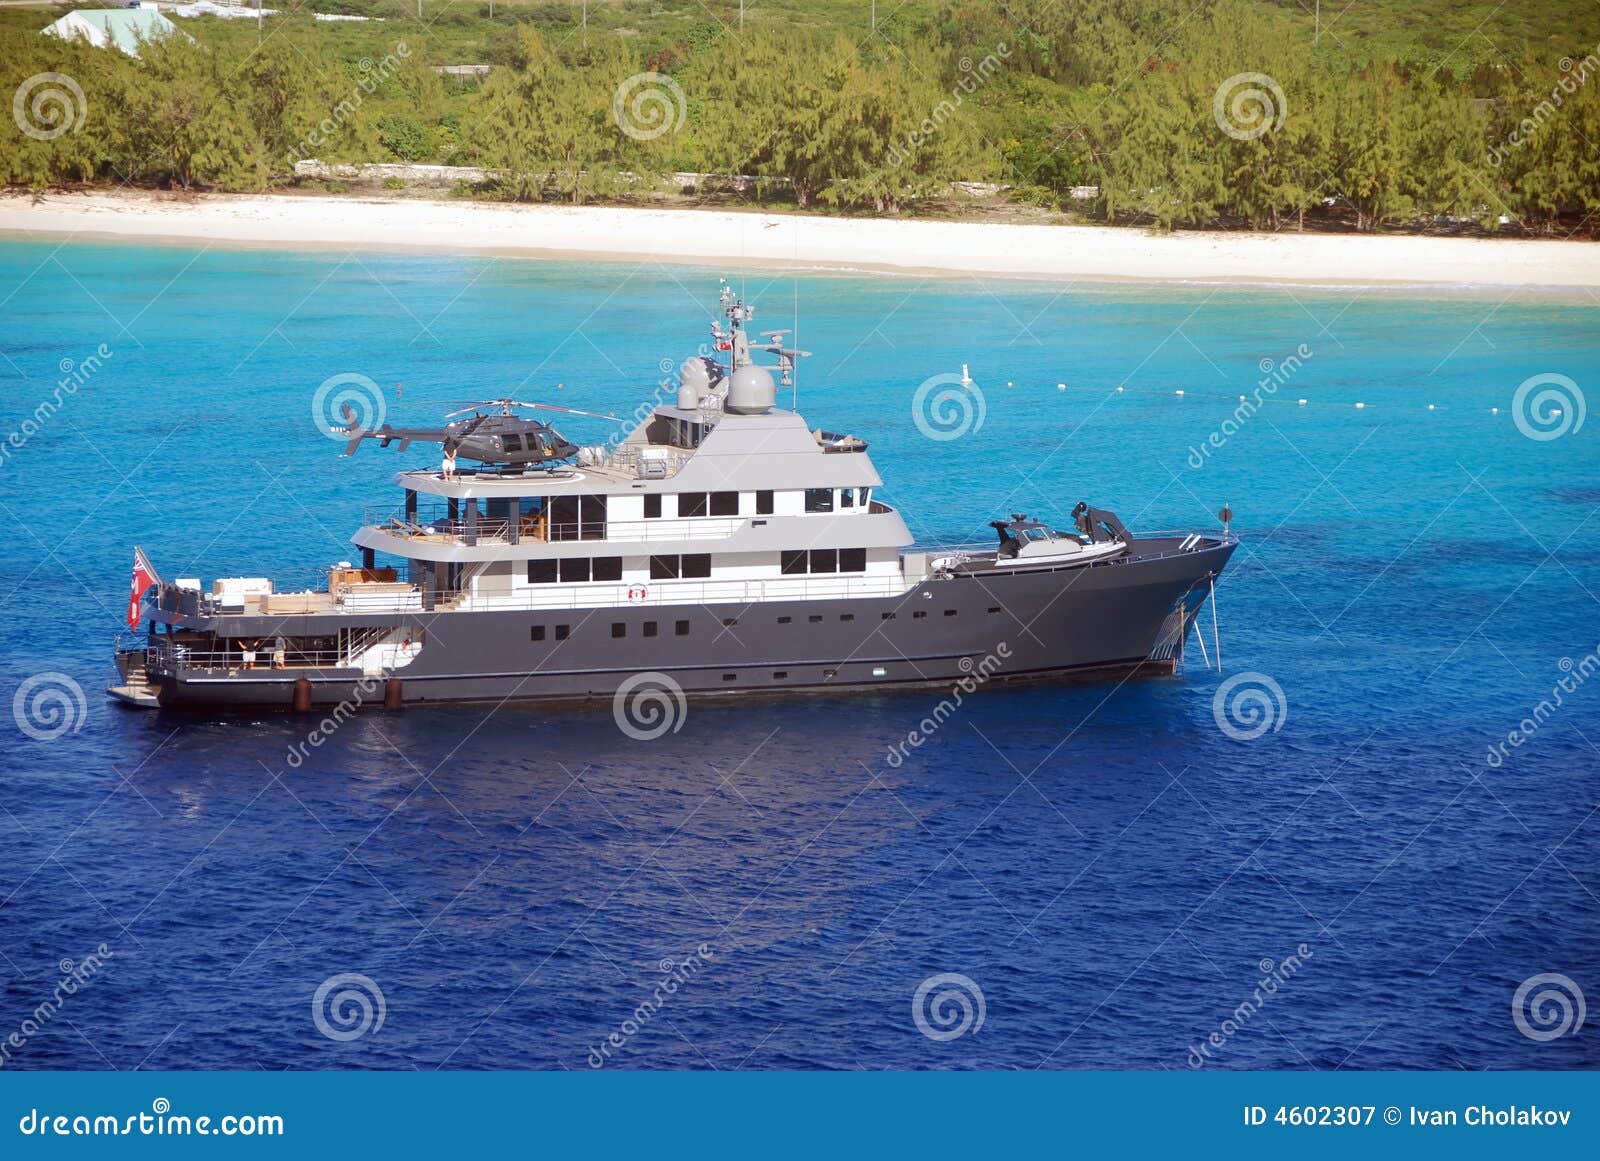 Luxury Yacht With Helicopter Royalty Free Stock Photography - Image 